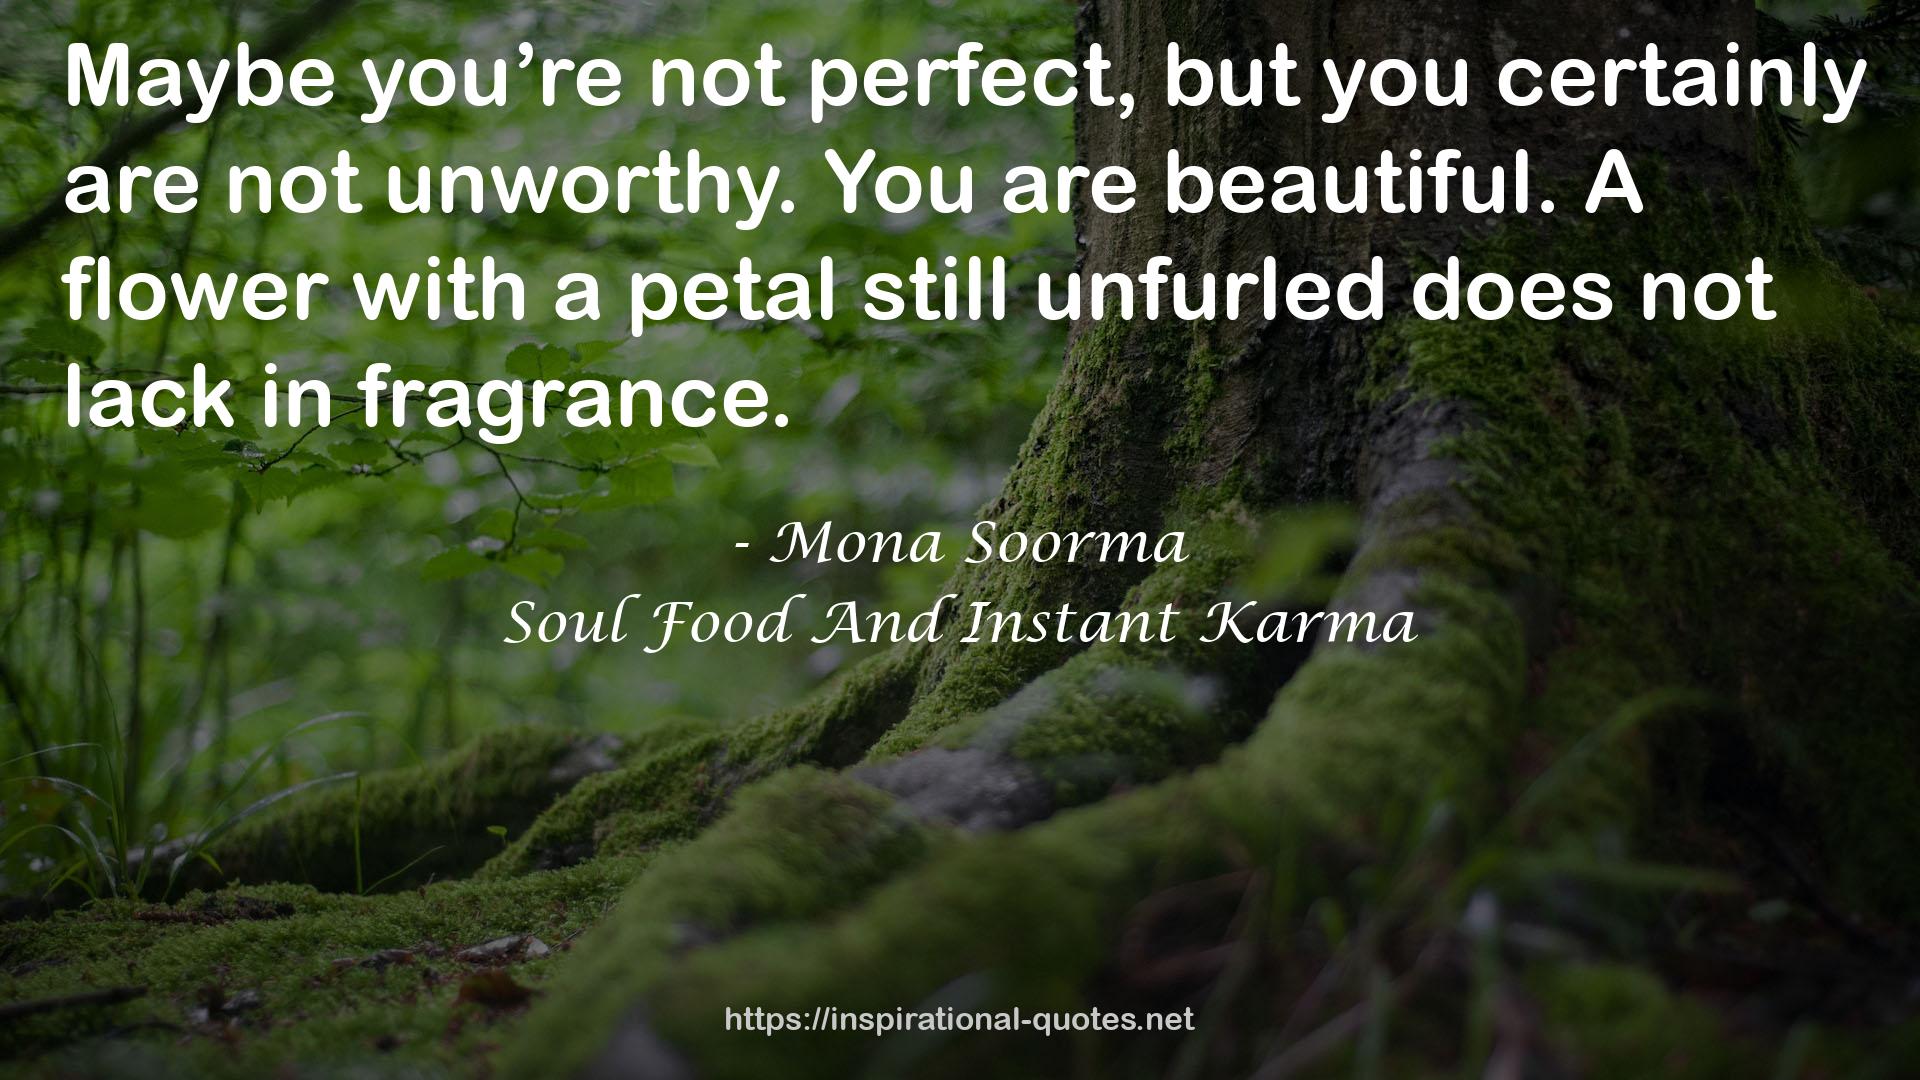 Soul Food And Instant Karma QUOTES